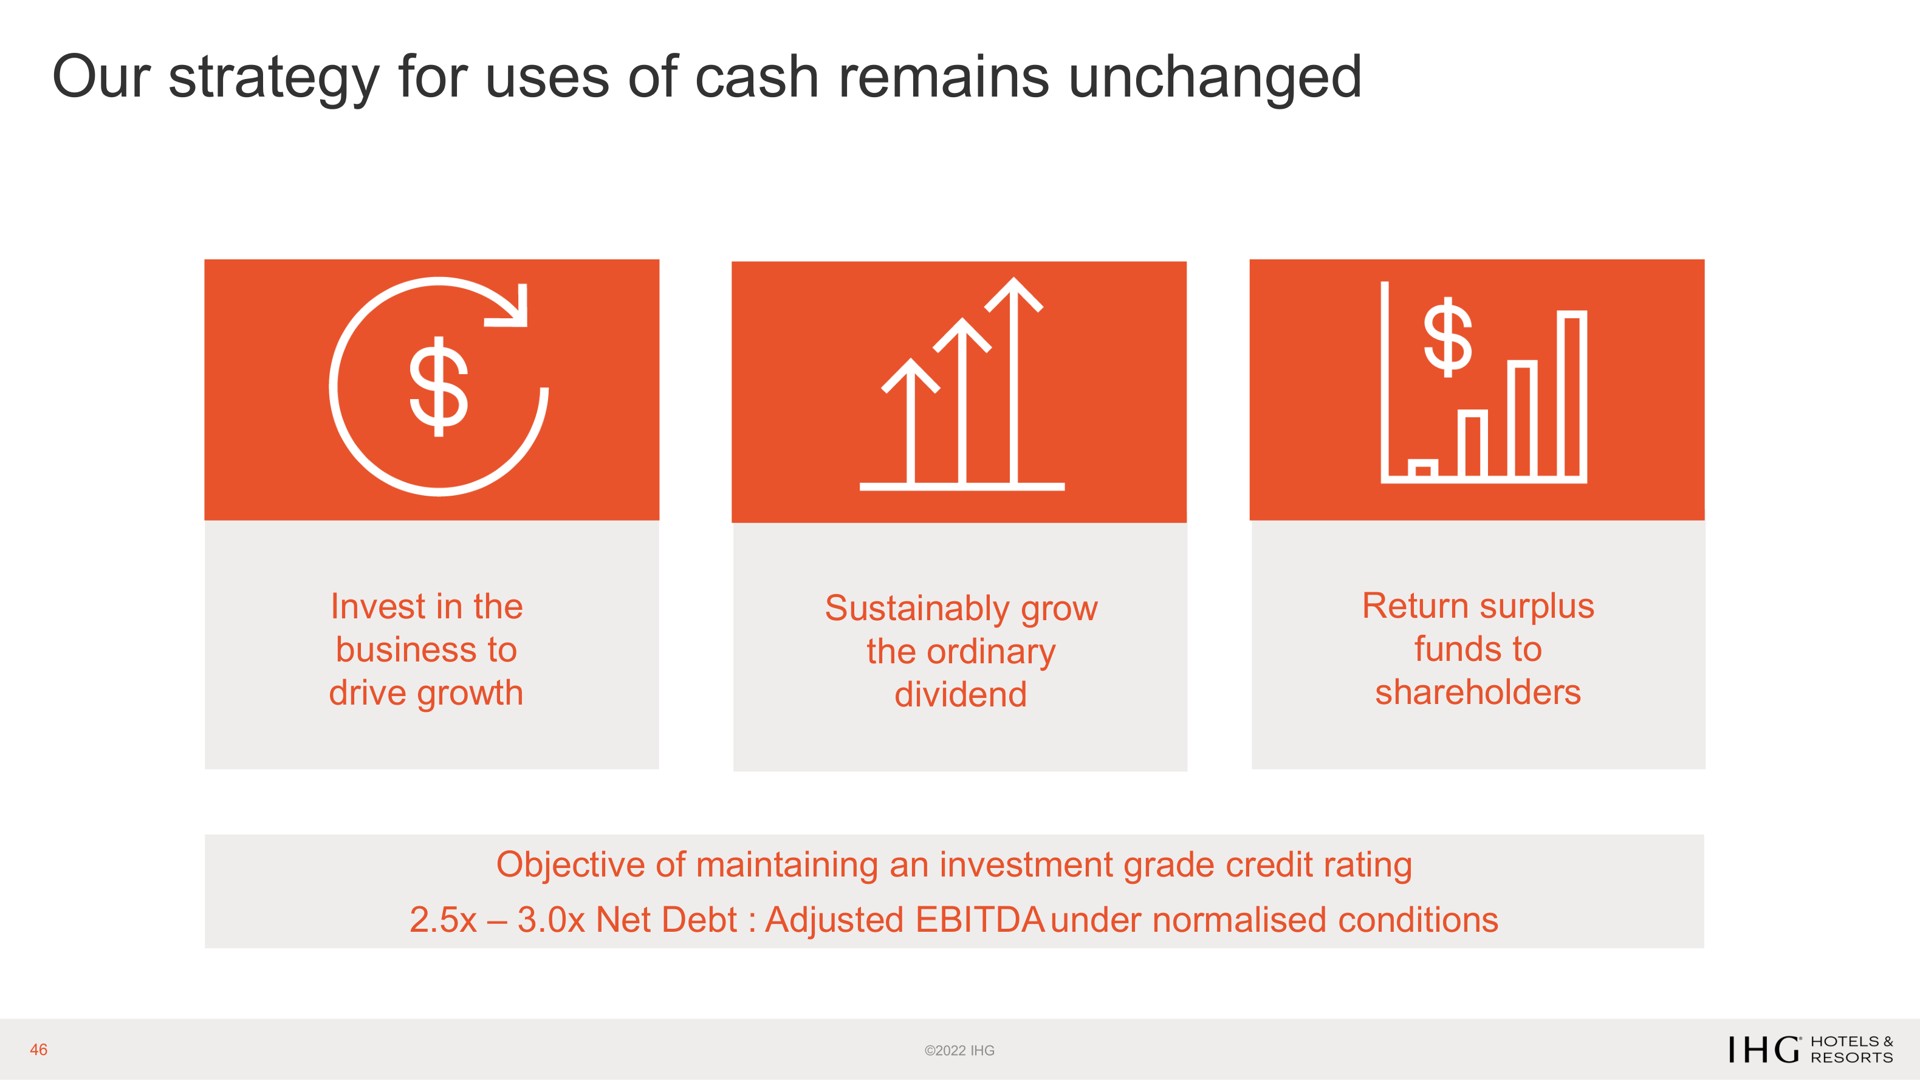 our strategy for uses of cash remains unchanged | IHG Hotels